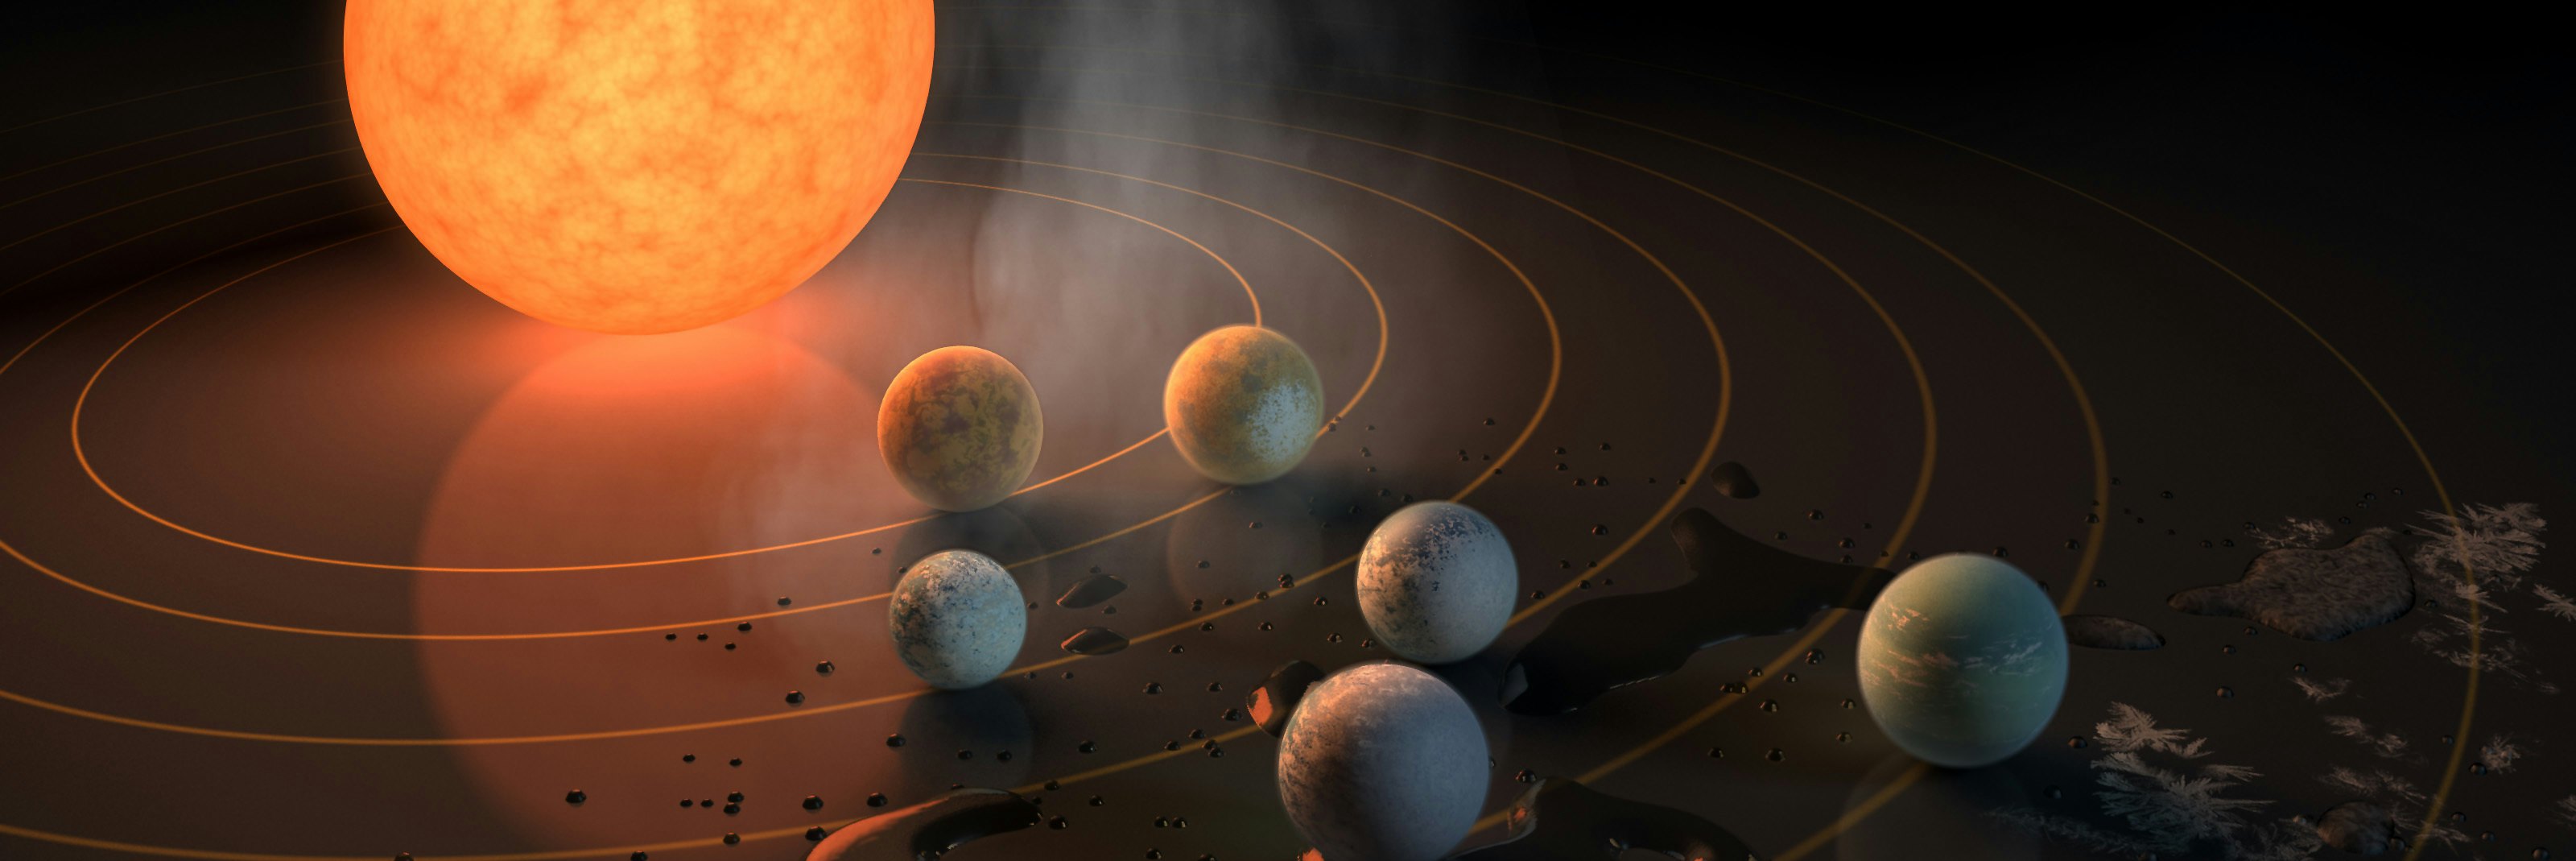 The TRAPPIST-1 planets are so close to each other that theorists estimated that it is likely that if life exists in the system, it can travel from planet to planet.